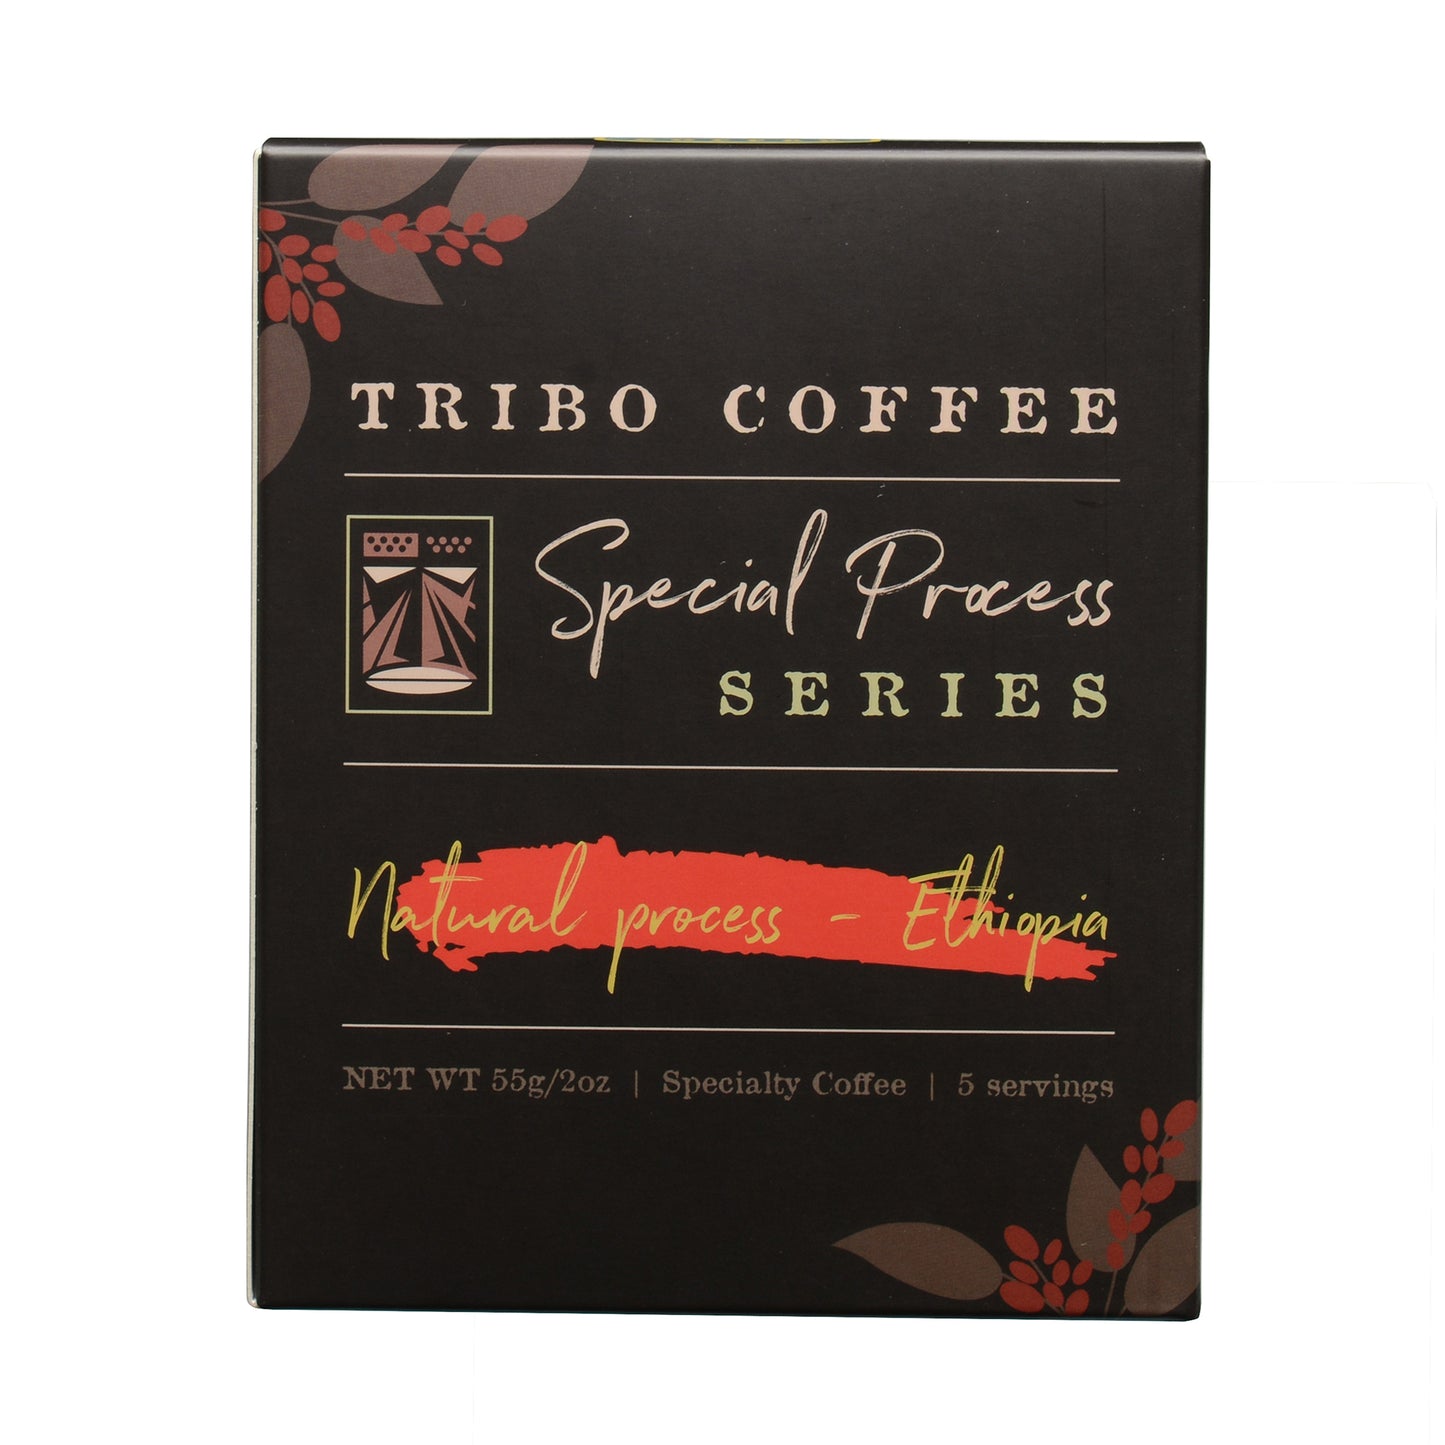 Tribo Coffee Single Serve pour Over - Ethiopia Natural Process Specialty Grade Coffee 5 Serving Boxes